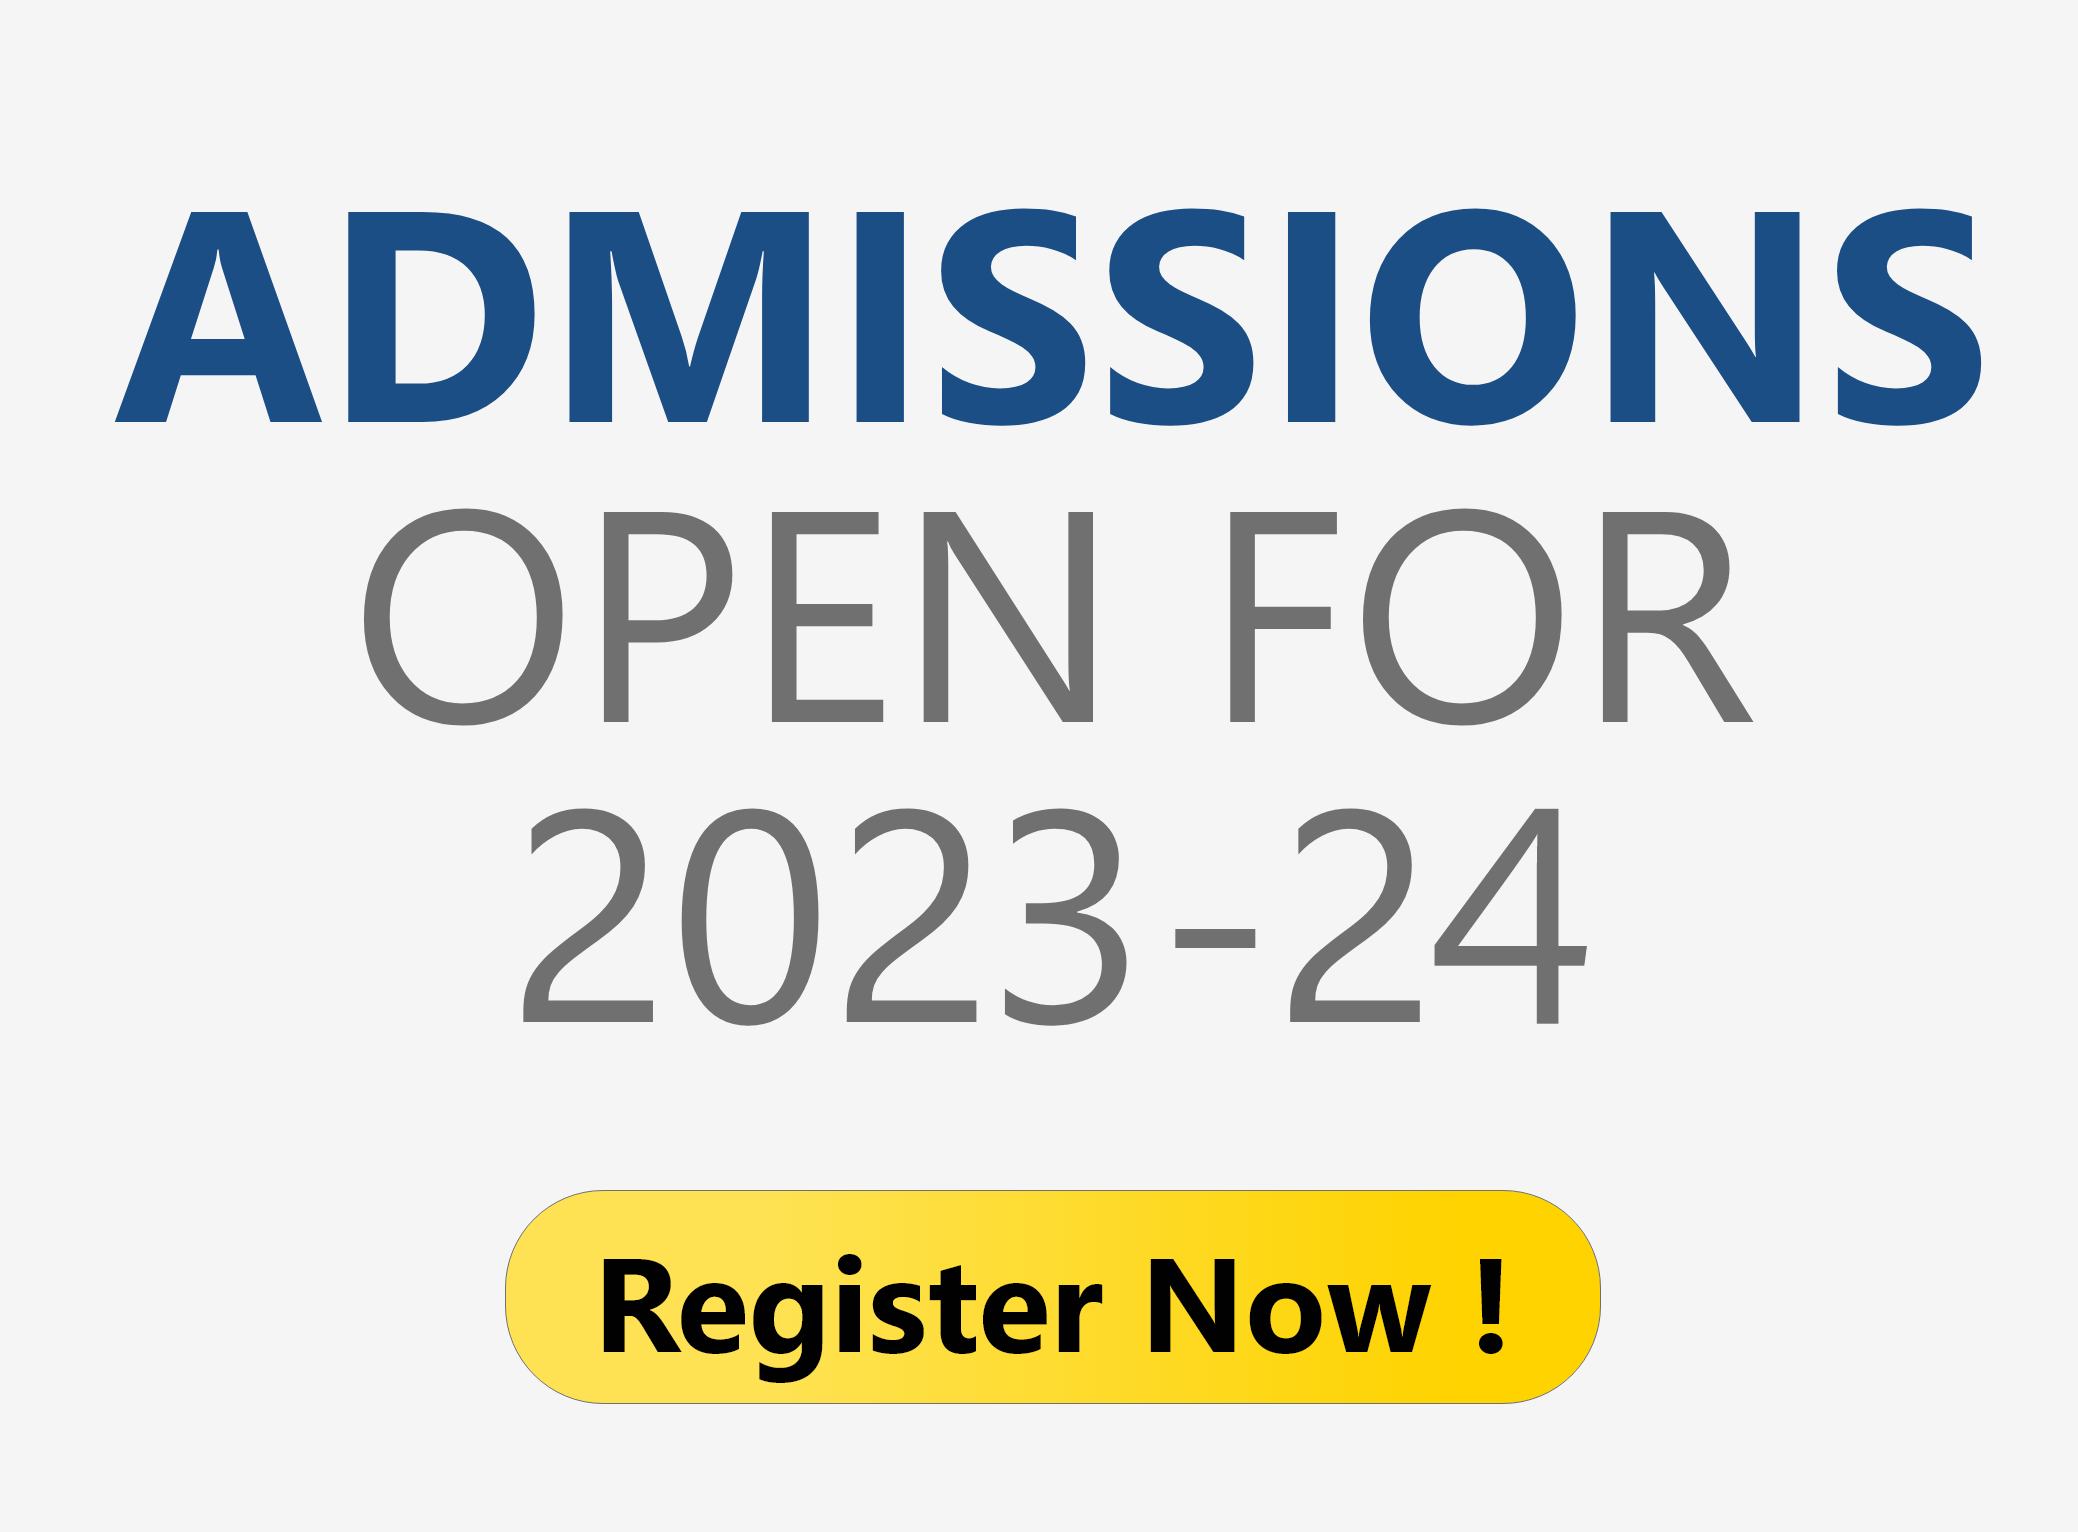 Admission Open 2023-2024